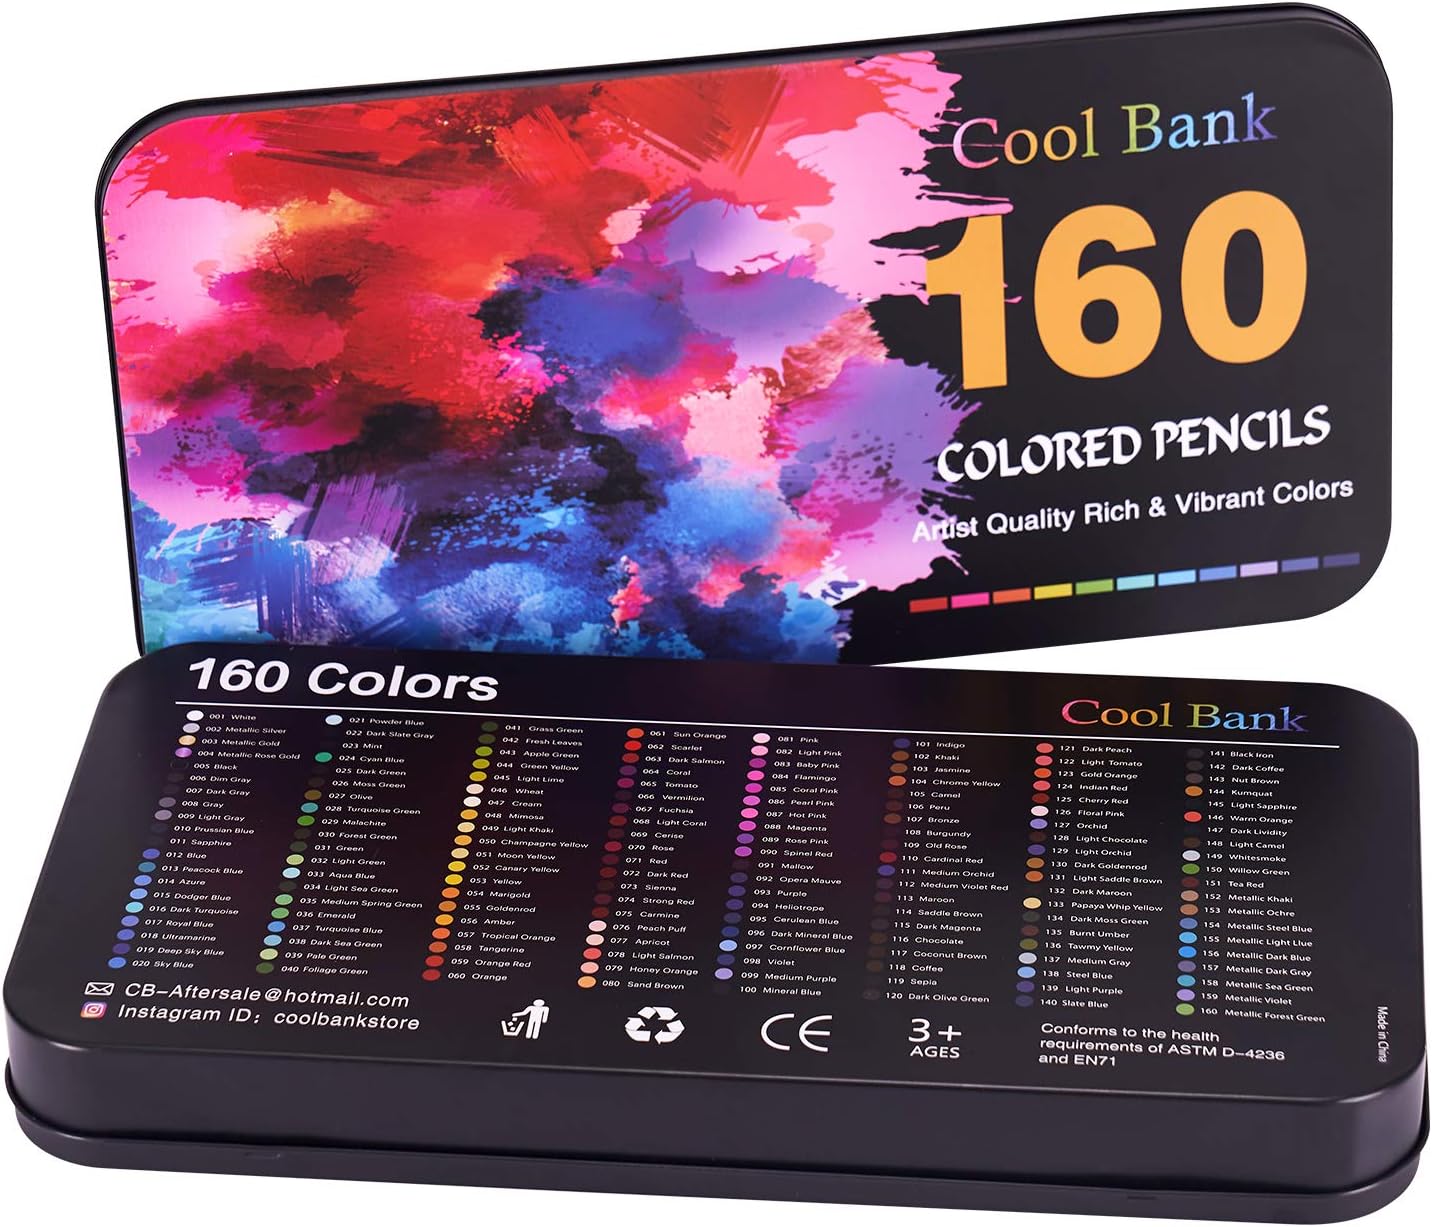 160 Professional Colored Pencils, Artist Pencils Set for Coloring Books, Premium Artist Soft Series Lead with Vibrant Colors for Sketching, Shading & Coloring in Tin Box - image 3 of 7